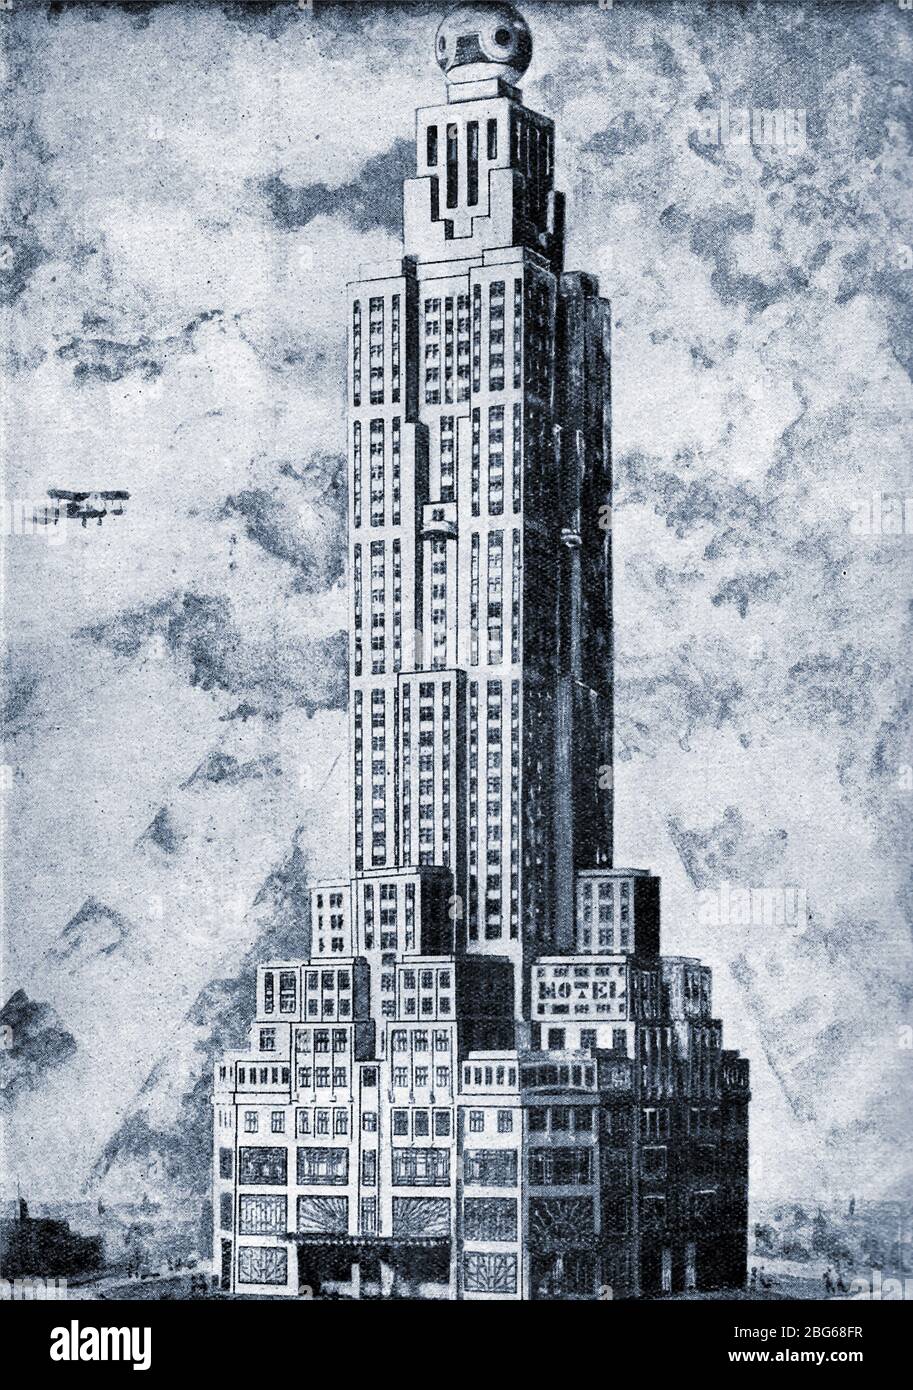 A 1930's architects drawing of the  proposed art deco  Sunray (or Sun Ray) skyscraper hotel designed by architect I. Massey. The ball at the top was intended to light up like the sun. The project was never built. (Note the biplane at left of picture) Stock Photo